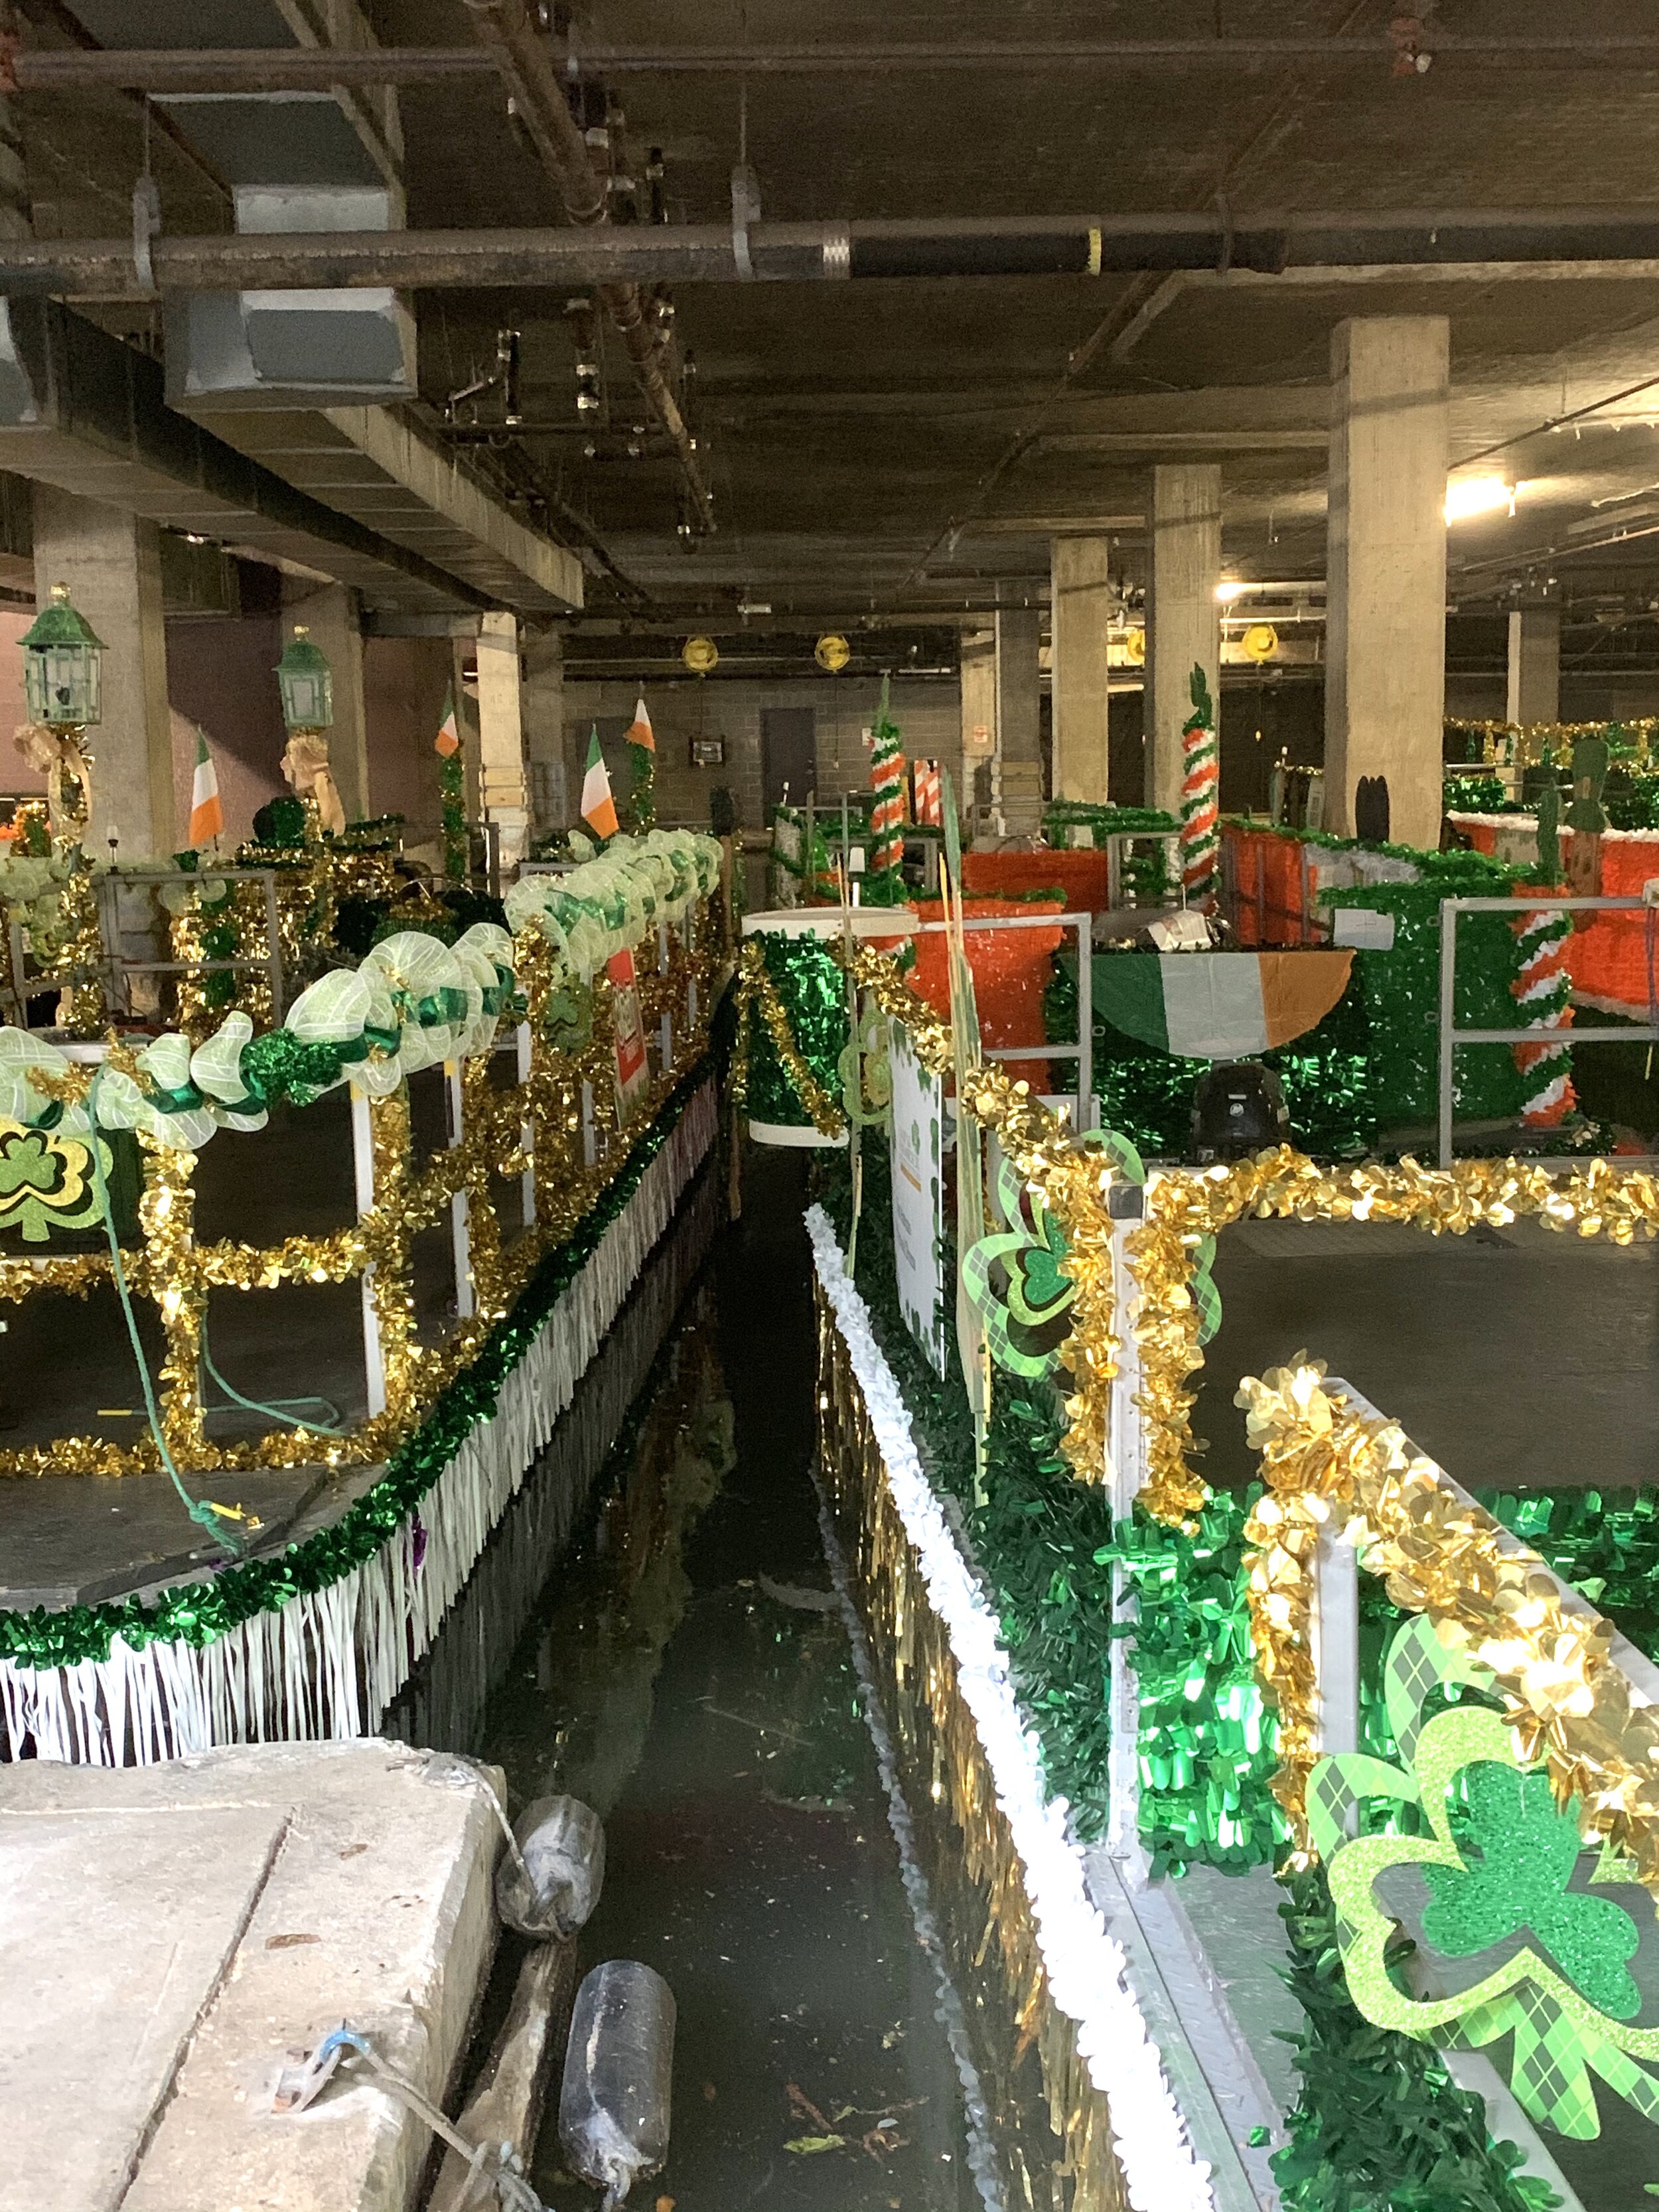  A building on the Riverwalk housed some of the floats for the St. Patrick’s Day parade. They were still in storage; the parade had been canceled. 